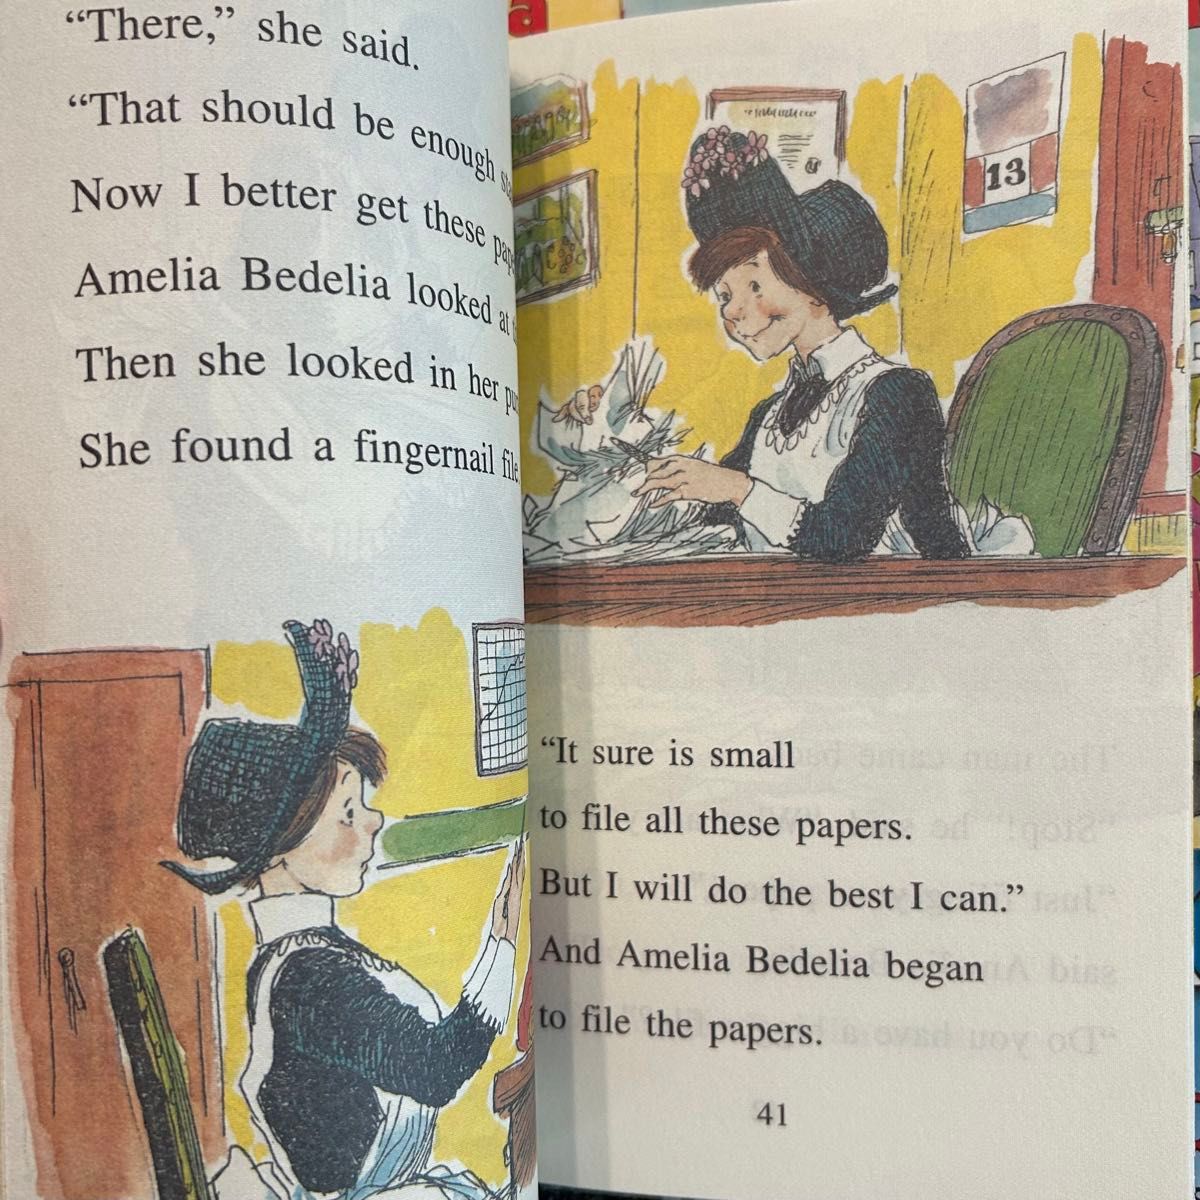 【E】I can read! amelia bedelia 4冊 マイヤペン対応 アメリア ベデリア 英語 絵本 洋書 児童書